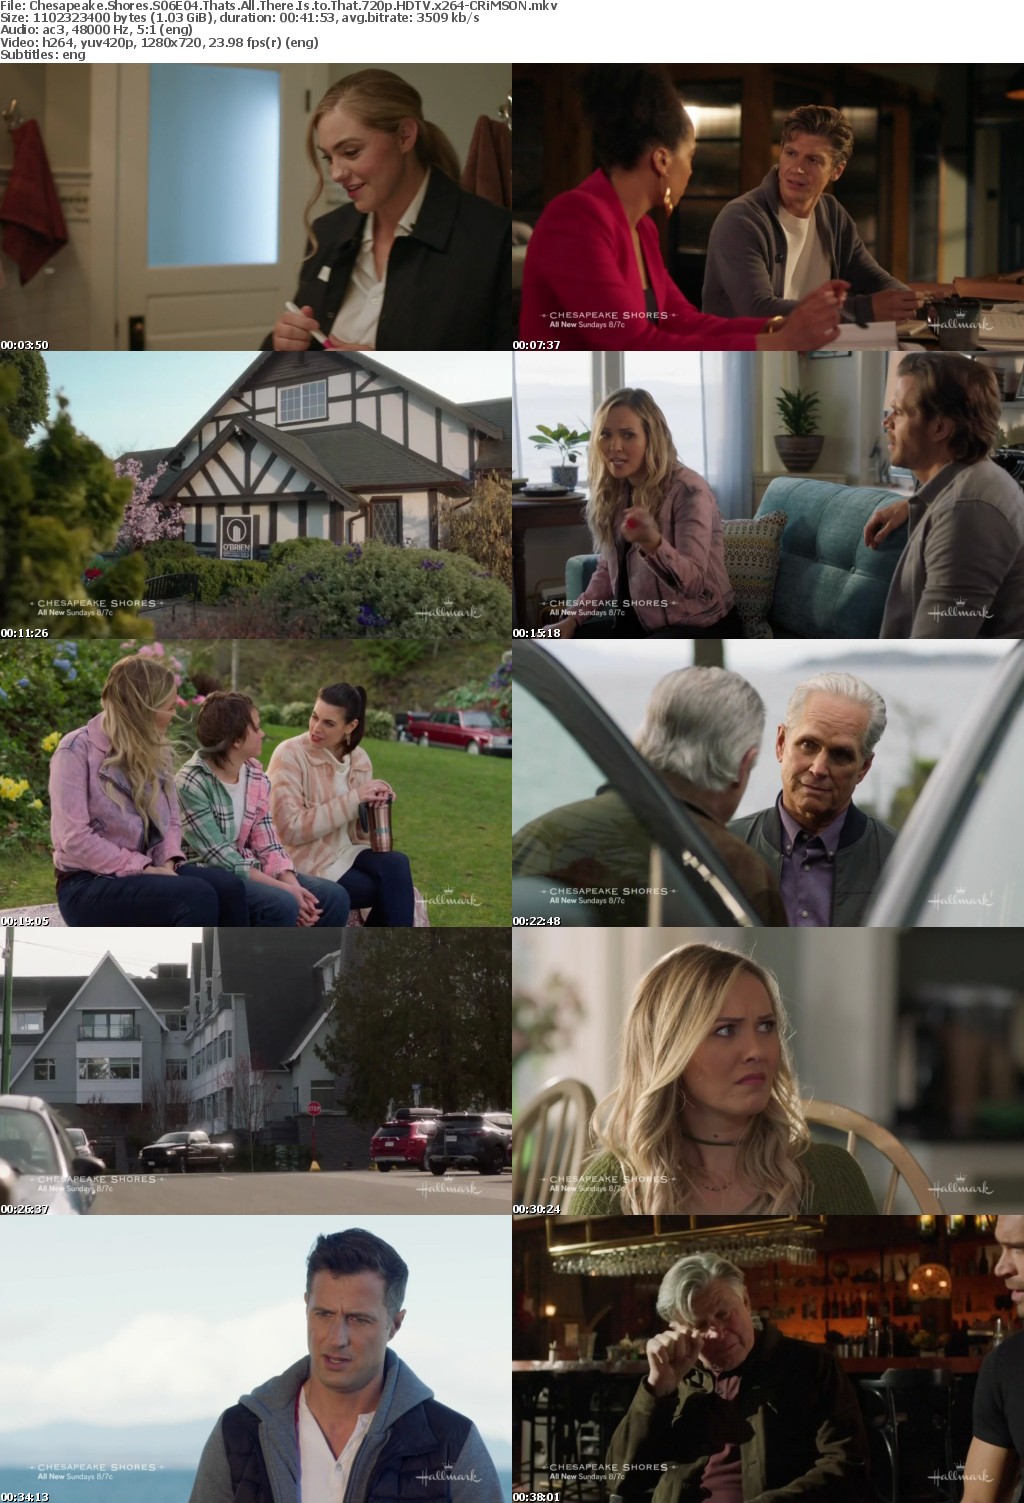 Chesapeake Shores S06E04 Thats All There Is to That 720p HDTV x264-CRiMSON